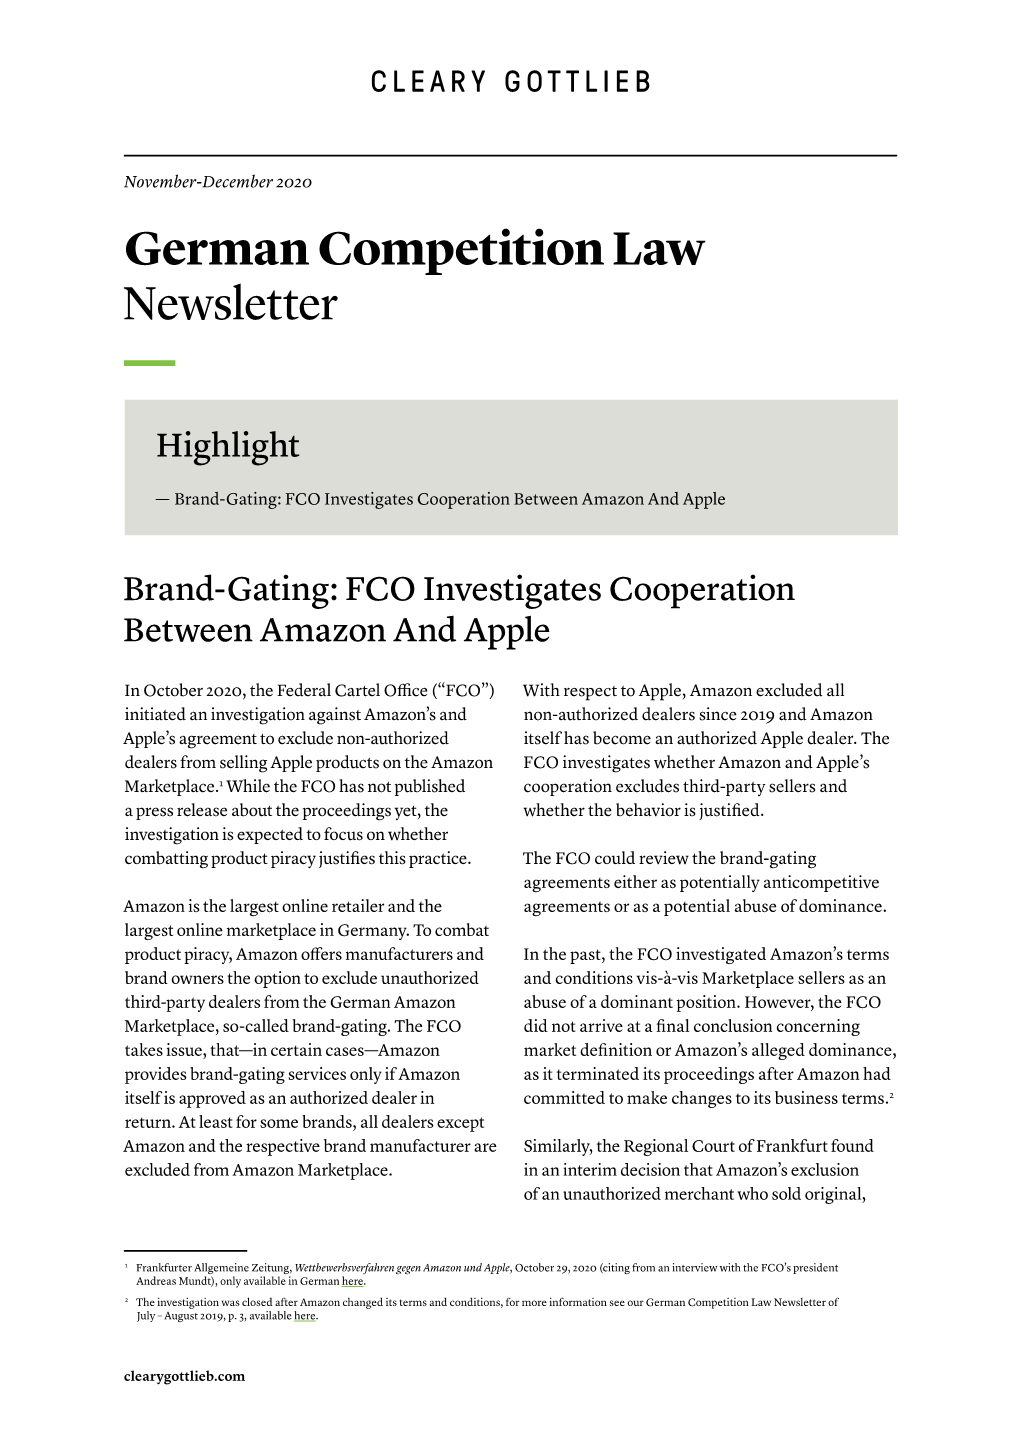 German Competition Law Newsletter — Highlight